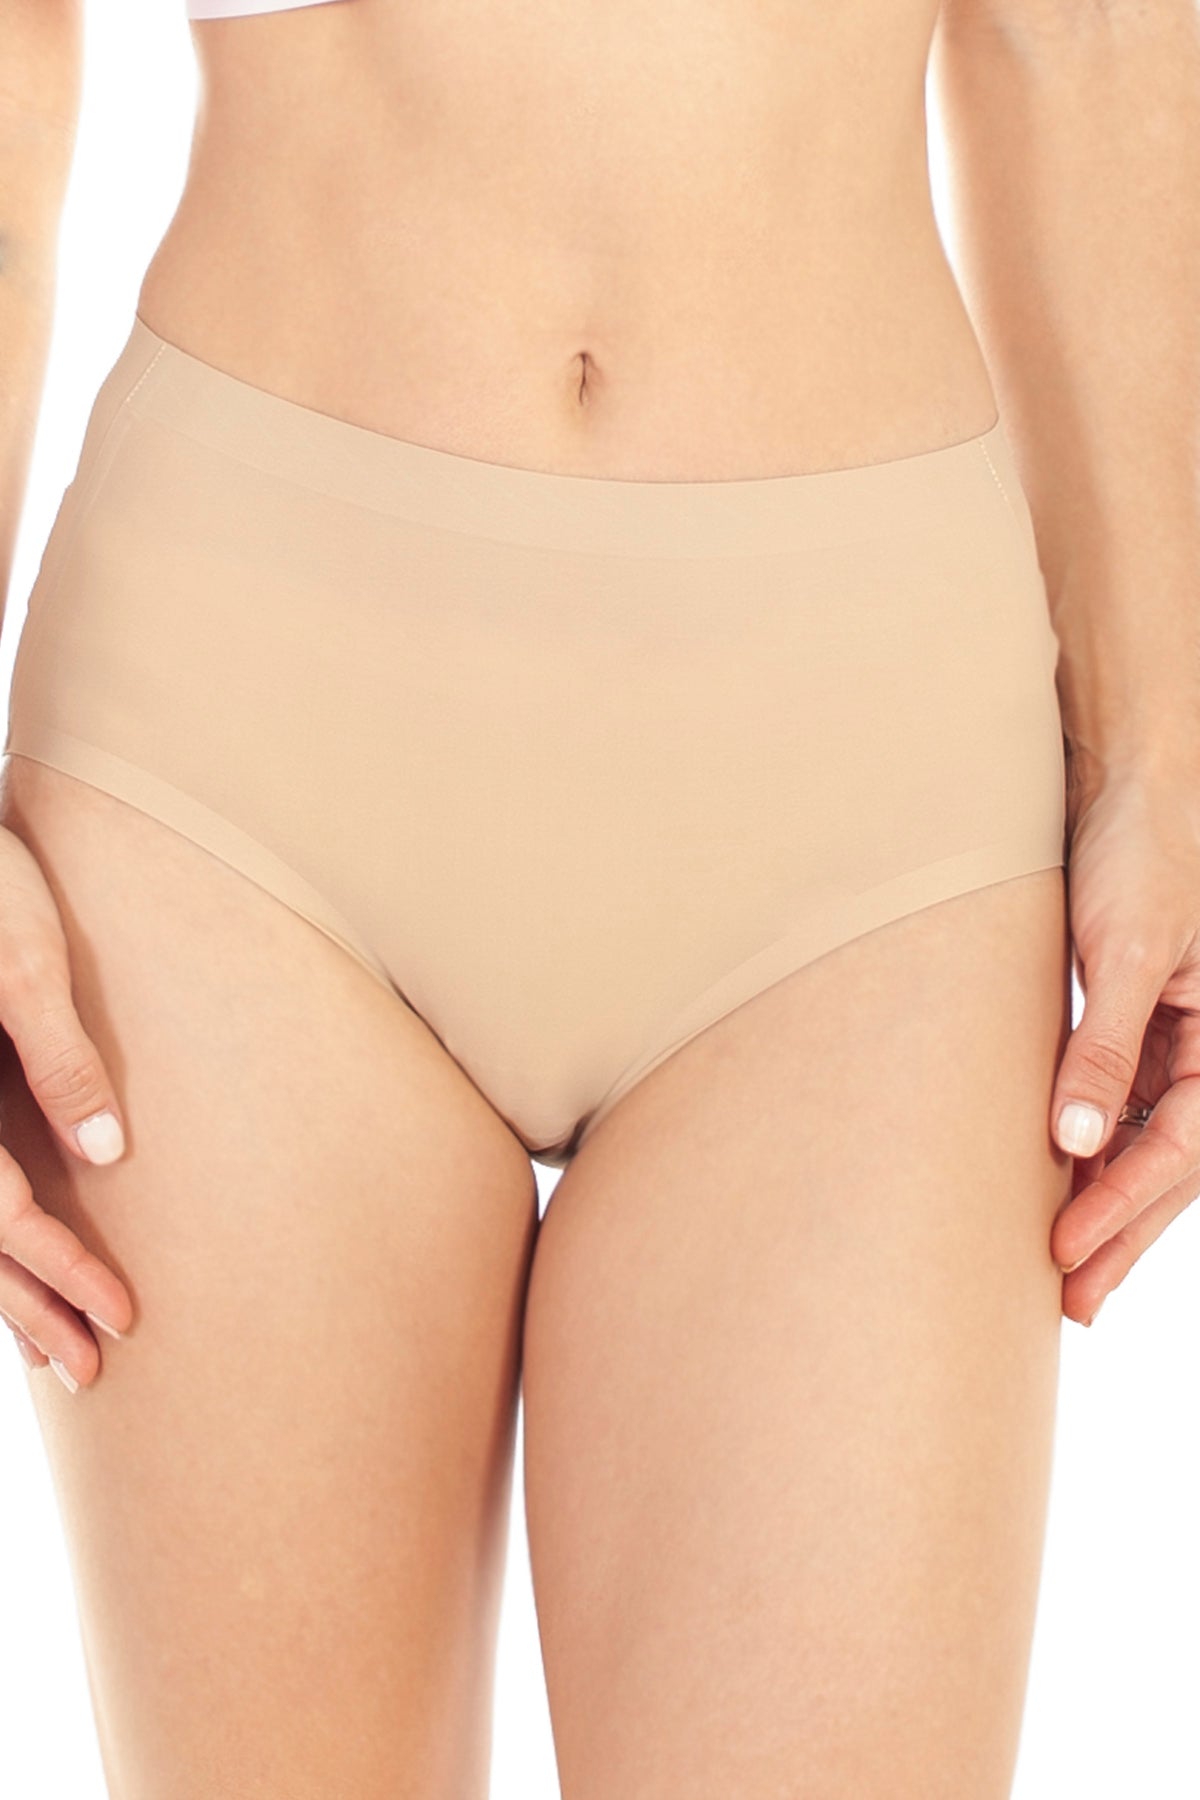 Bummer Plain Solid Bikini Underwear for Women, Antibacterial Panties 3X  Softer & Breathable Than Cotton for Ladies